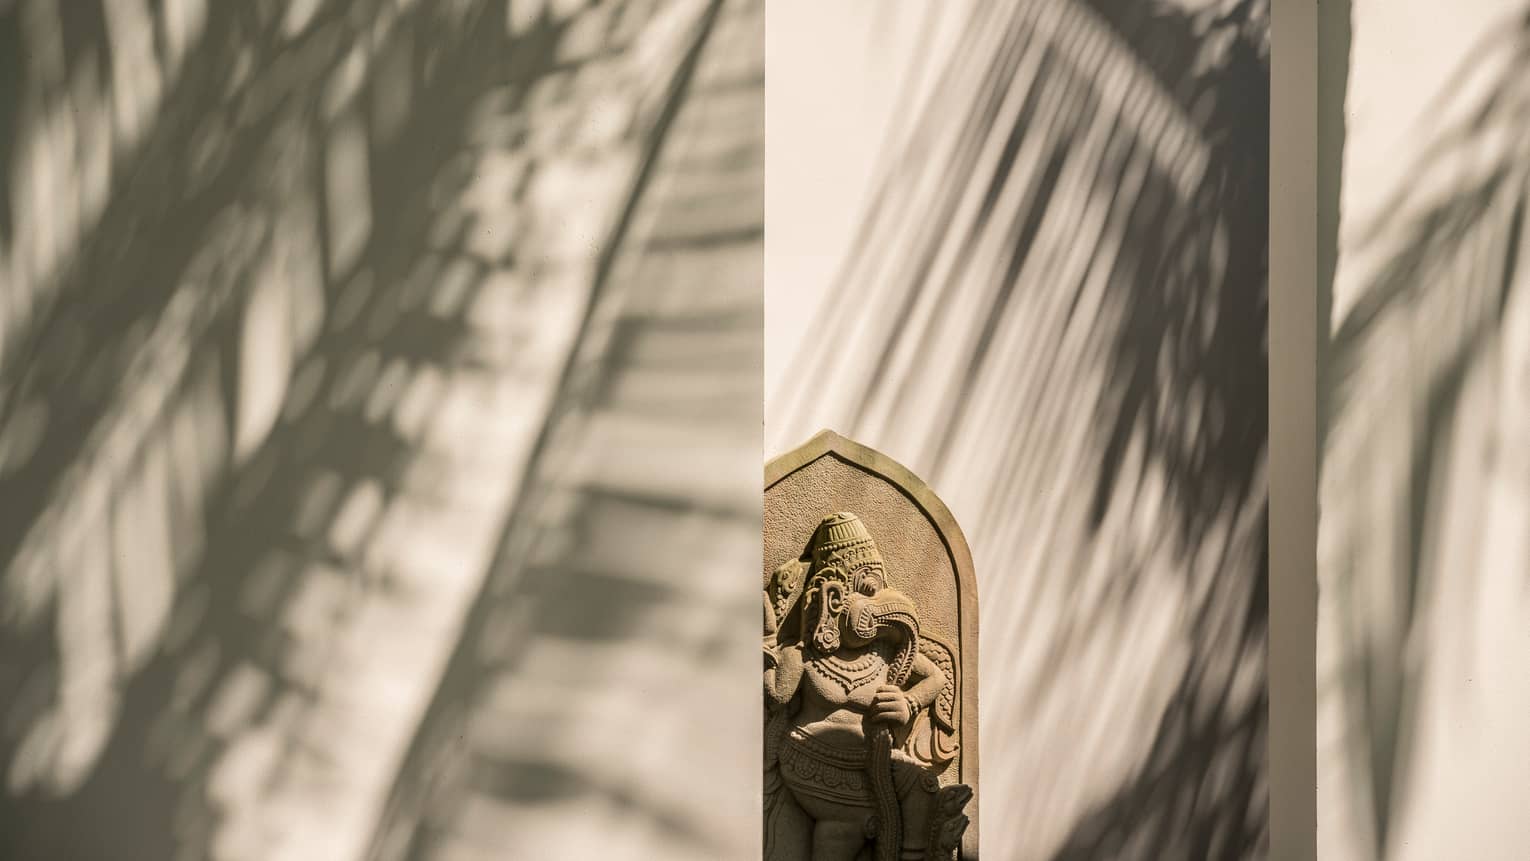 Stone carving on outdoor wall with shadows of palm fronds 